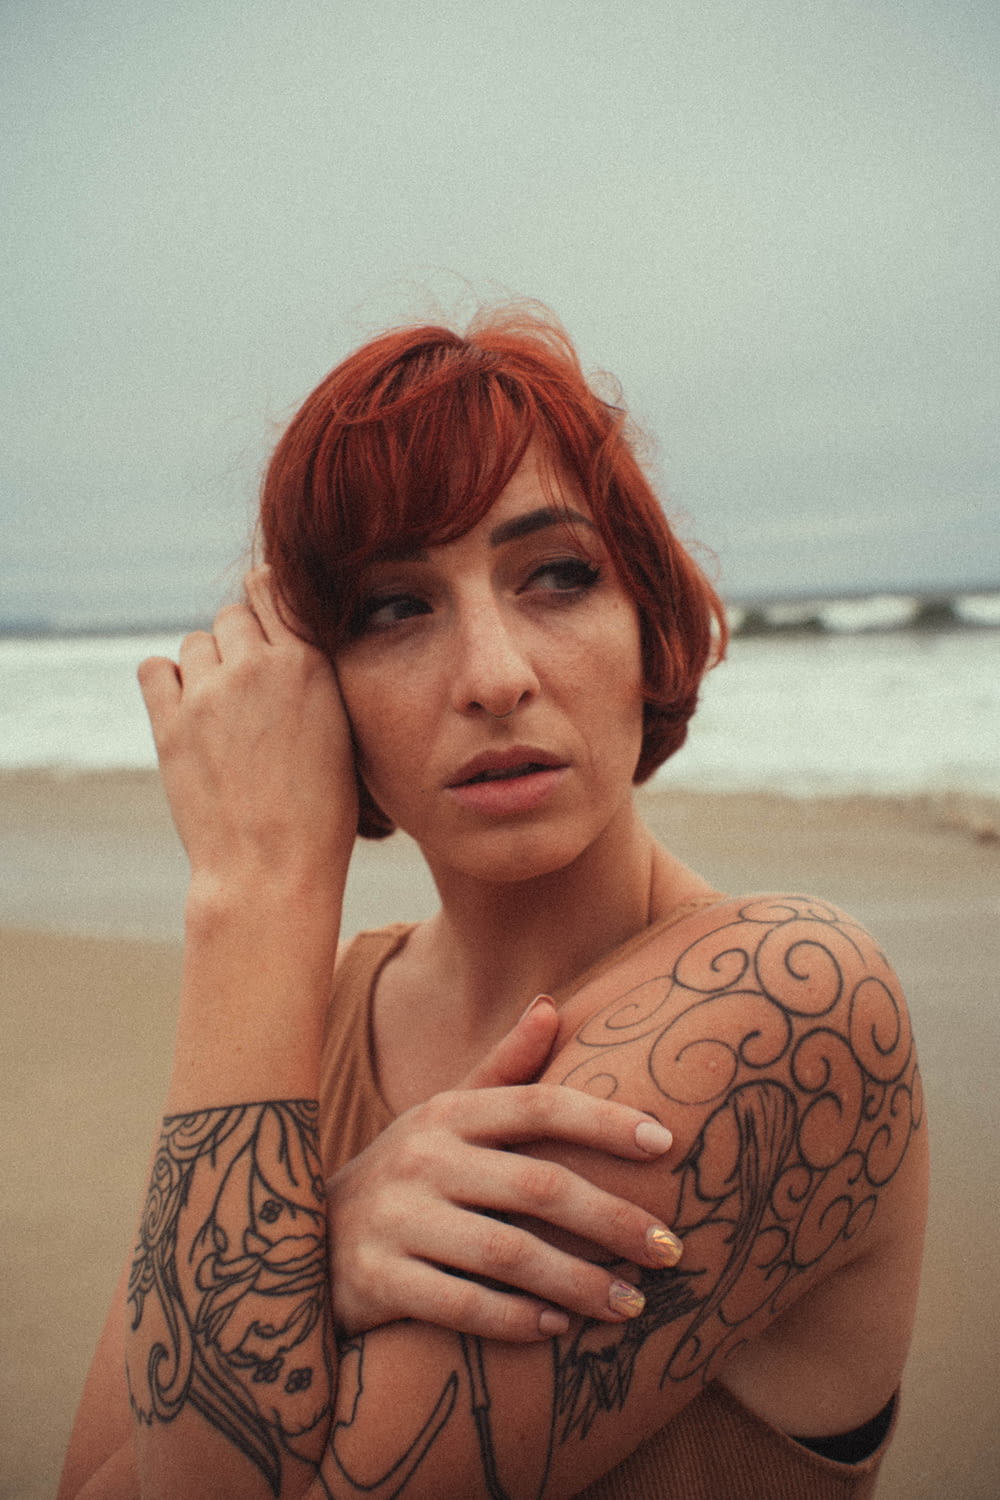 a woman with red hair and tattoos on her arm